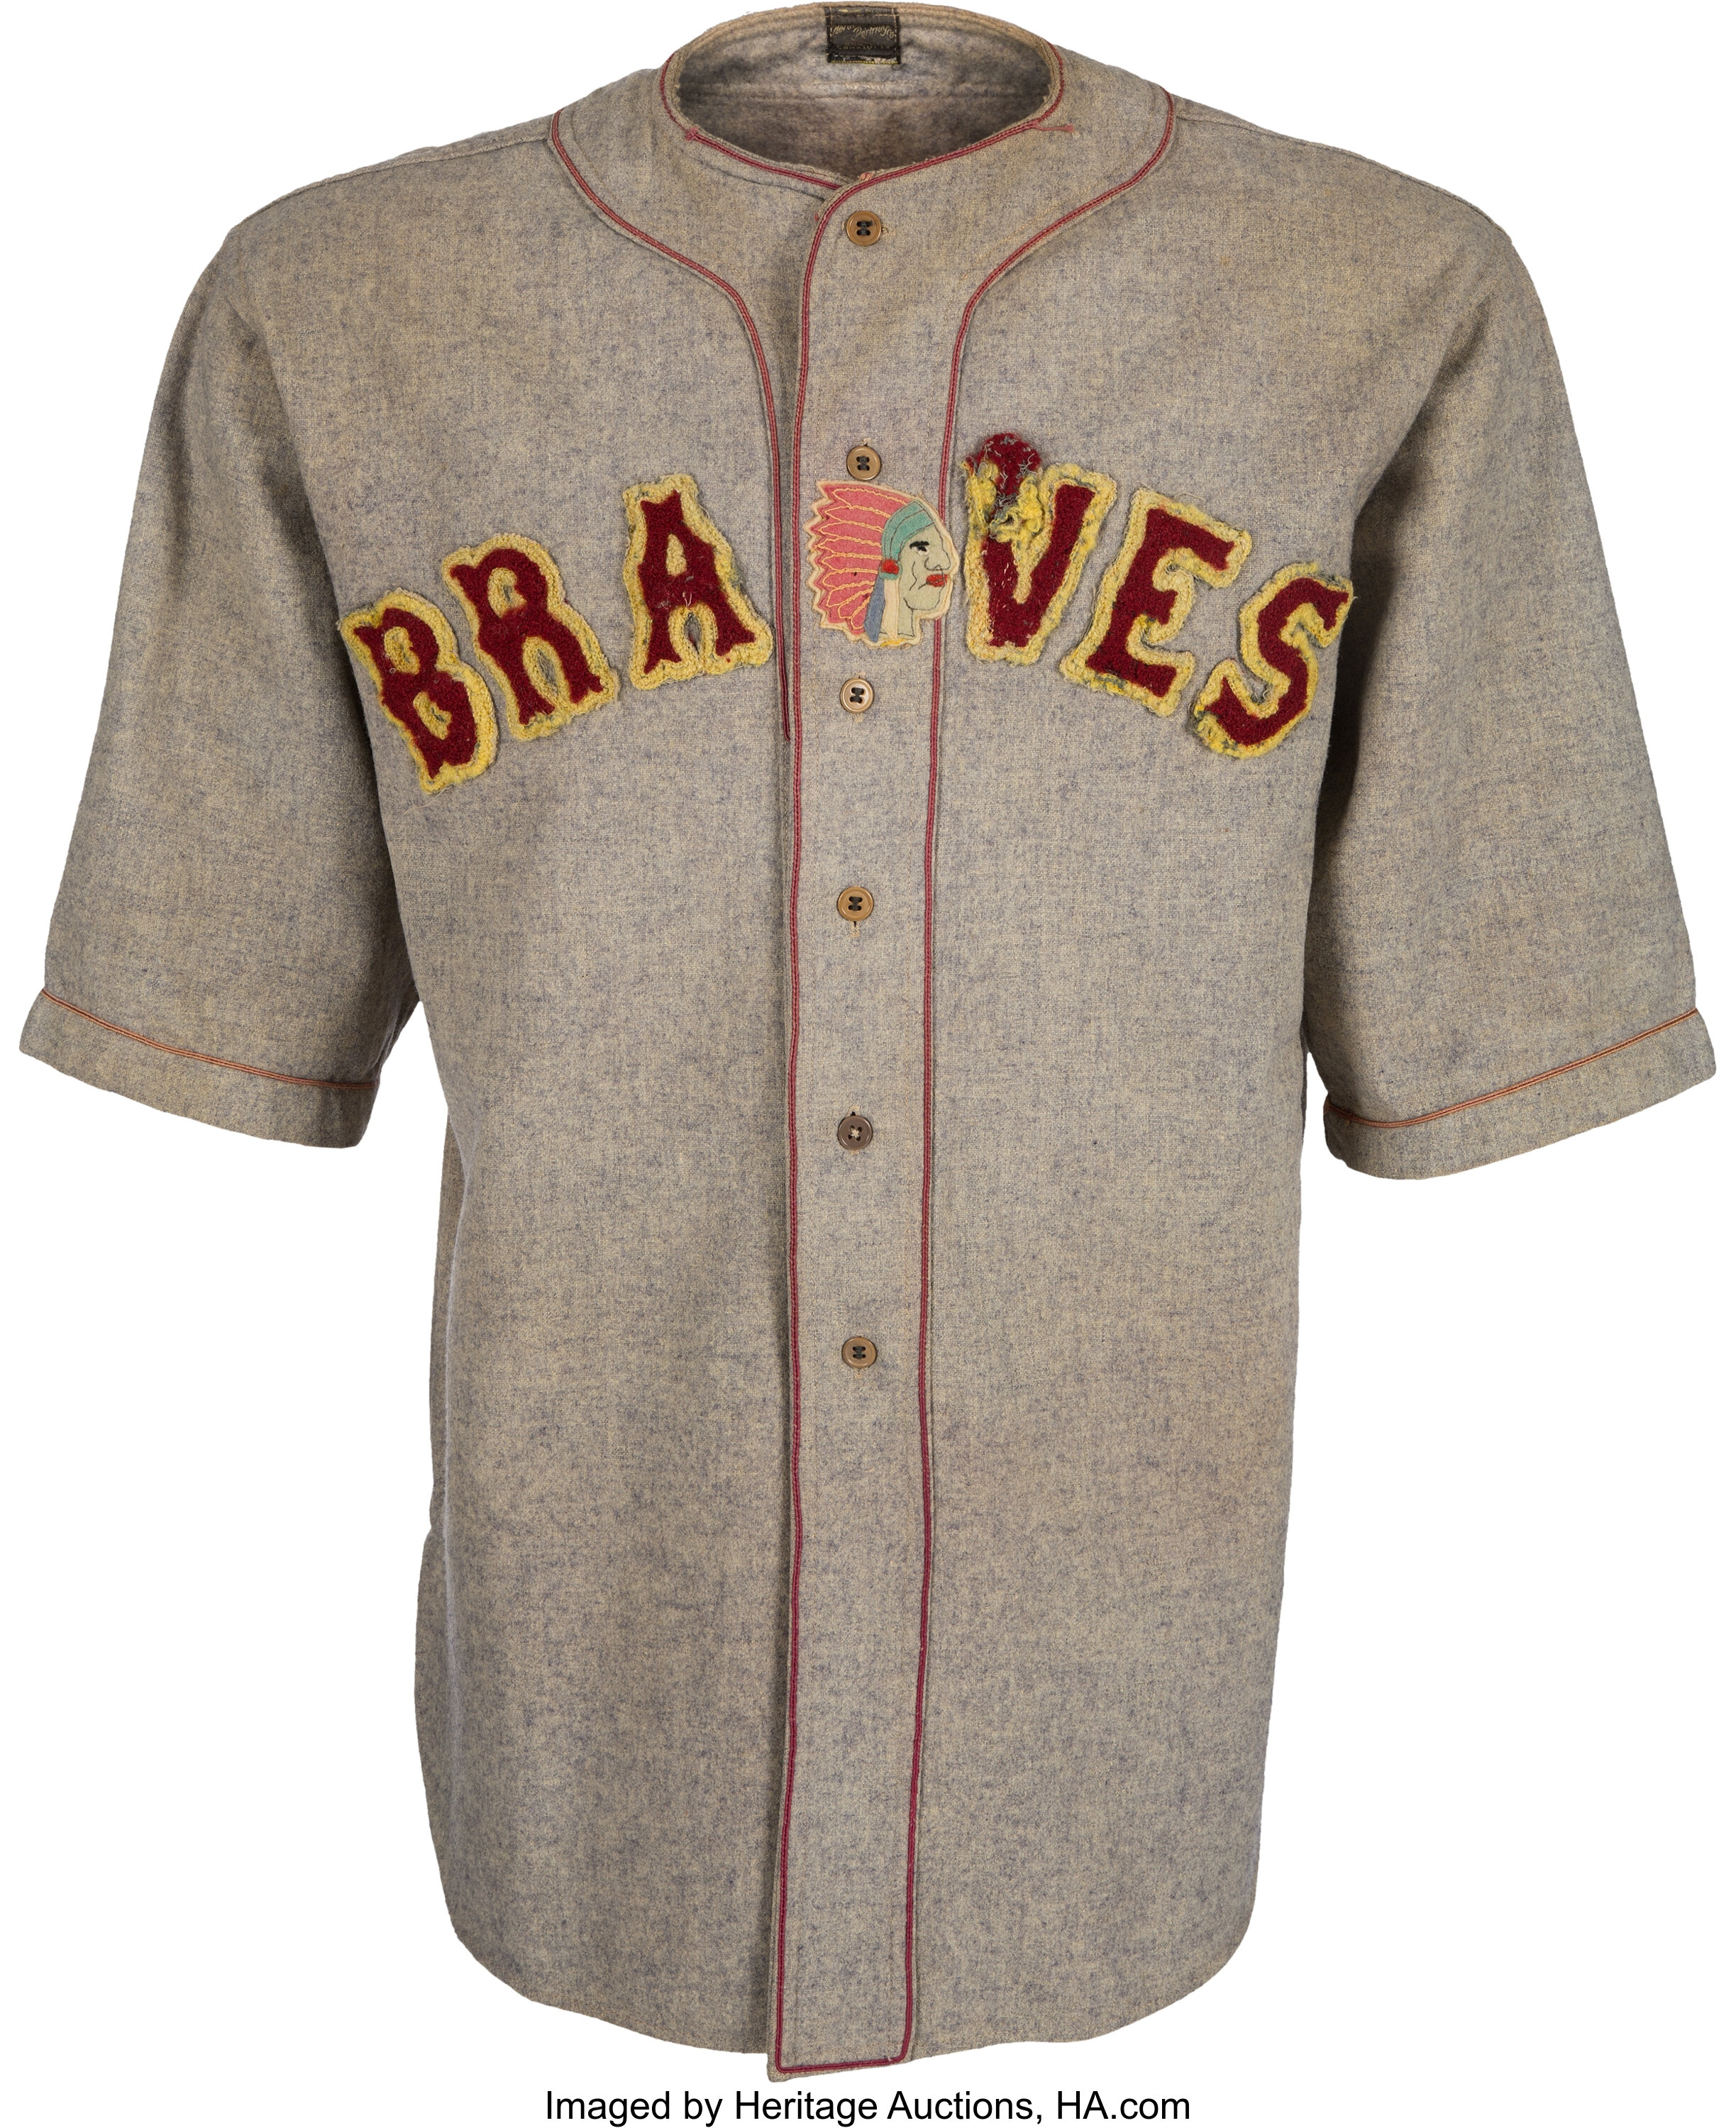 1929 Boston Braves Game Worn Jersey with Rare Indian Head Patch